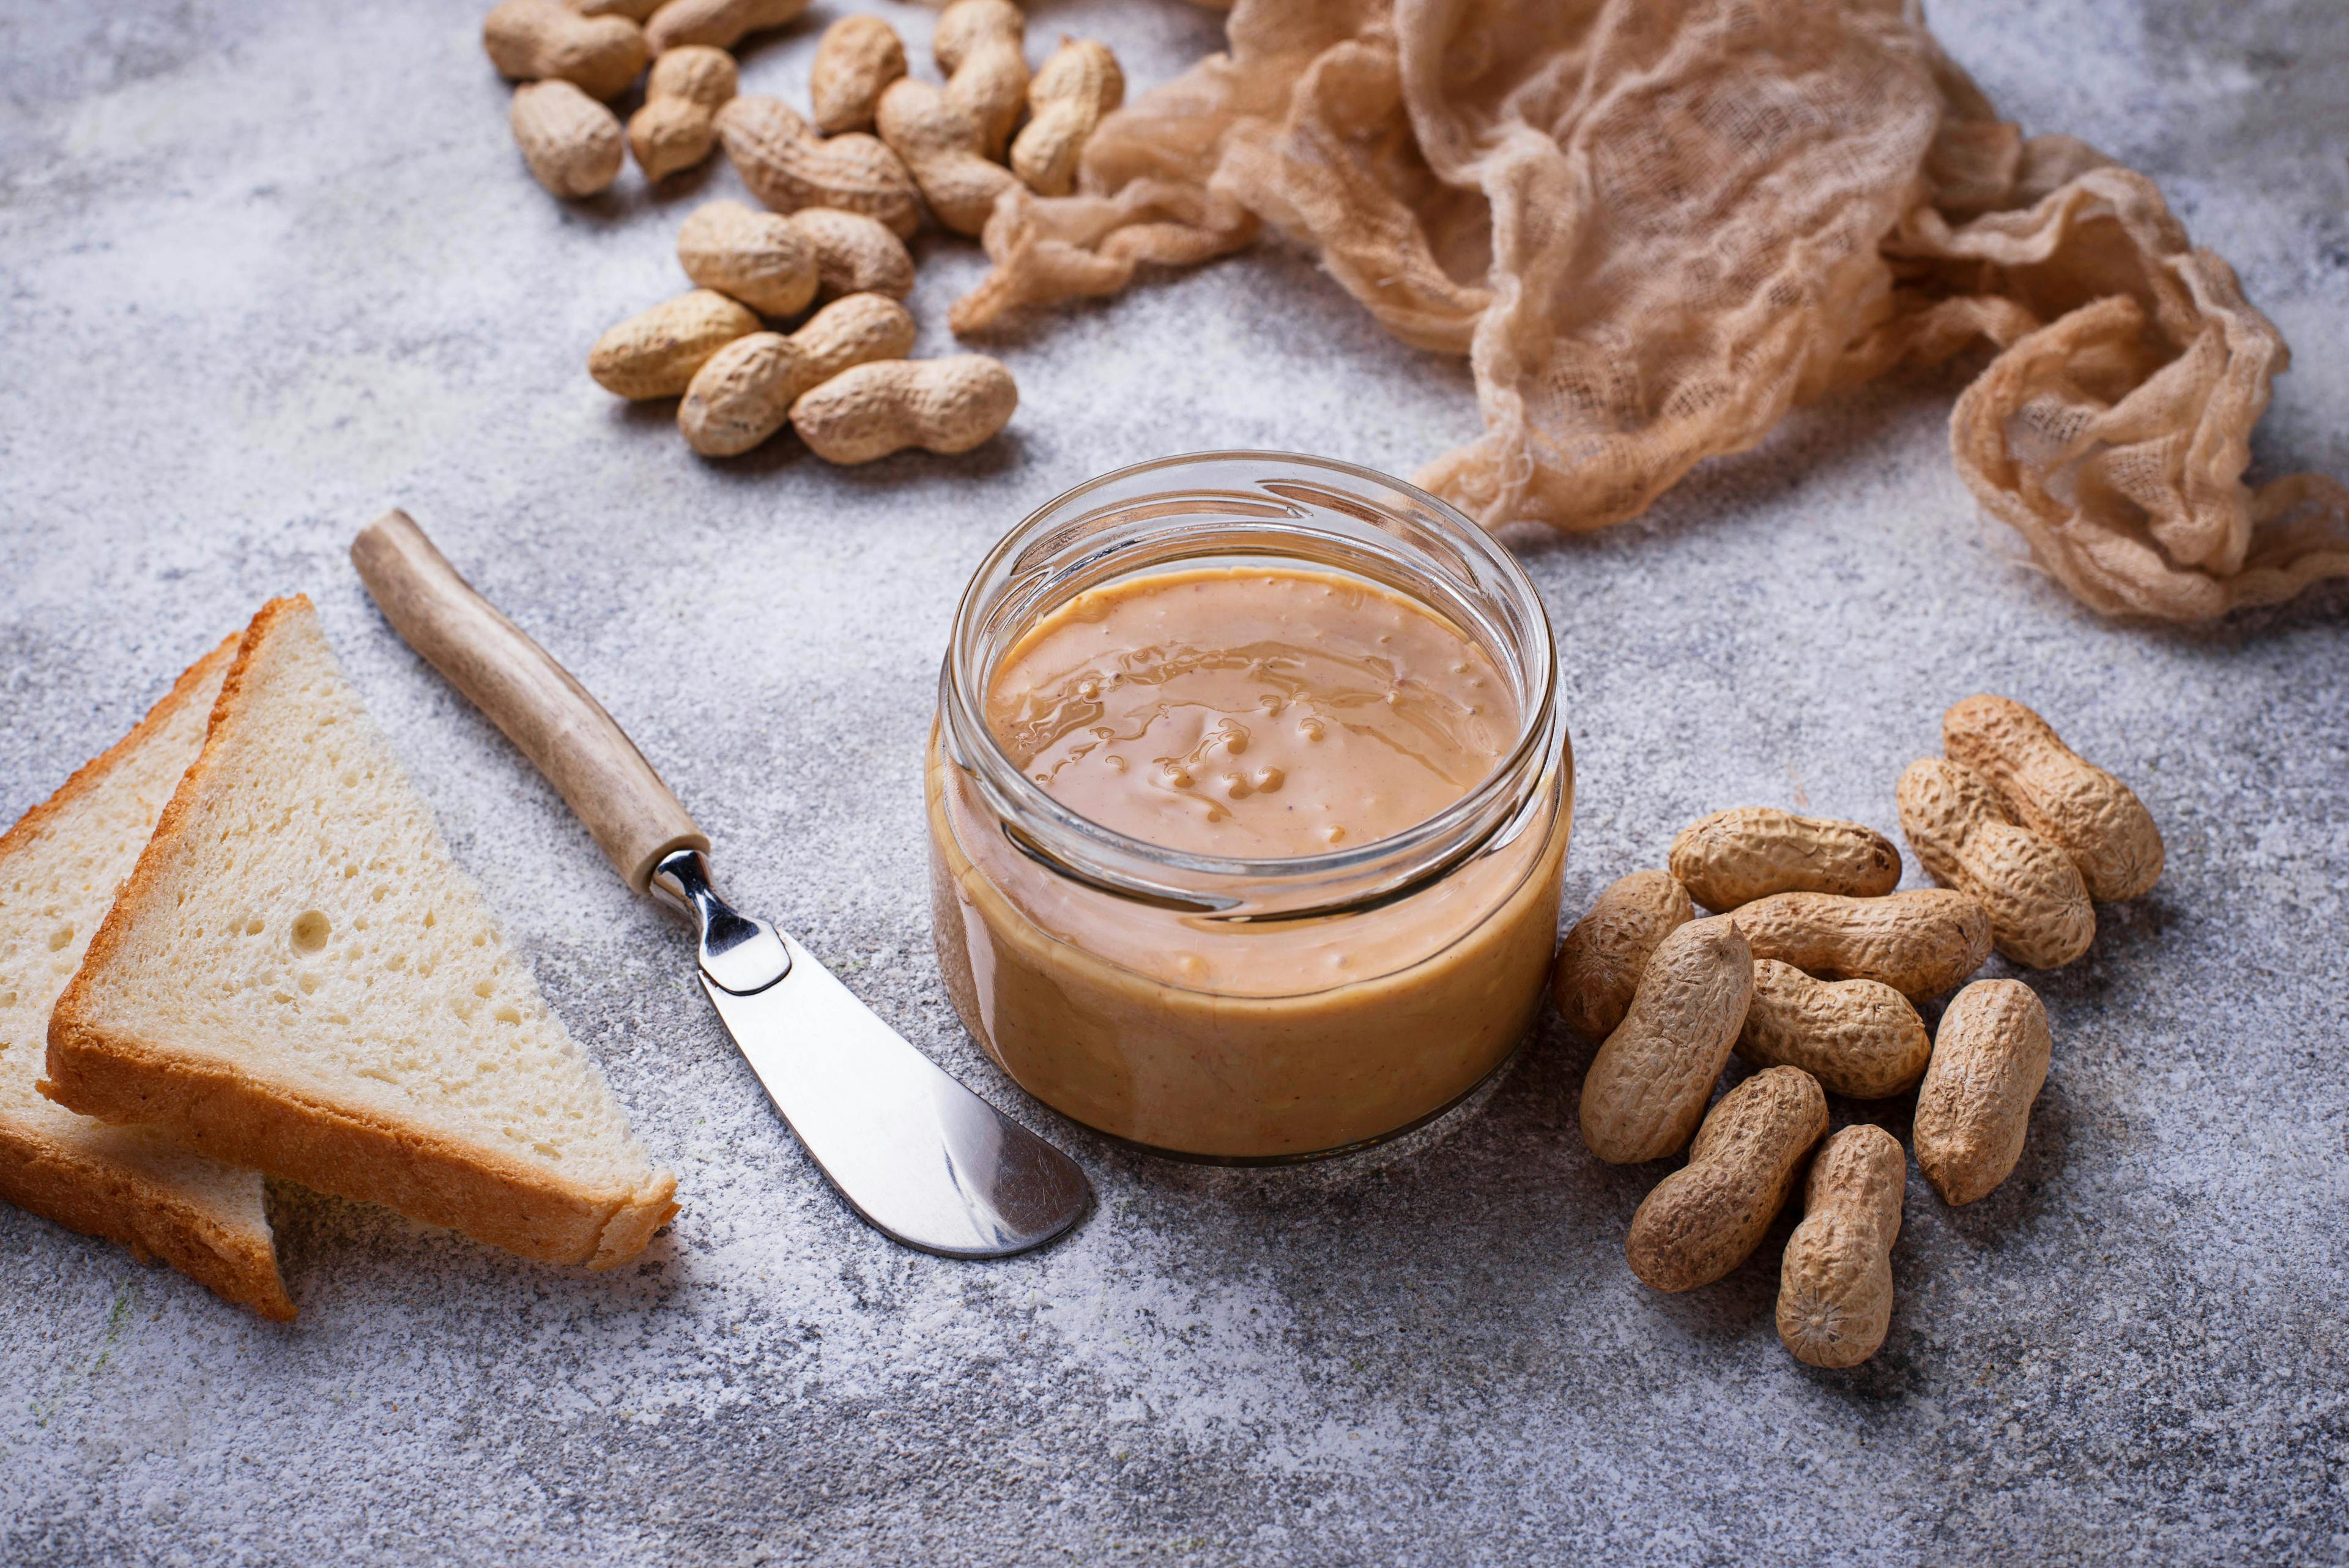 New Guidelines to Prevent Food Allergies in Pediatric Atopic Dermatitis Patients